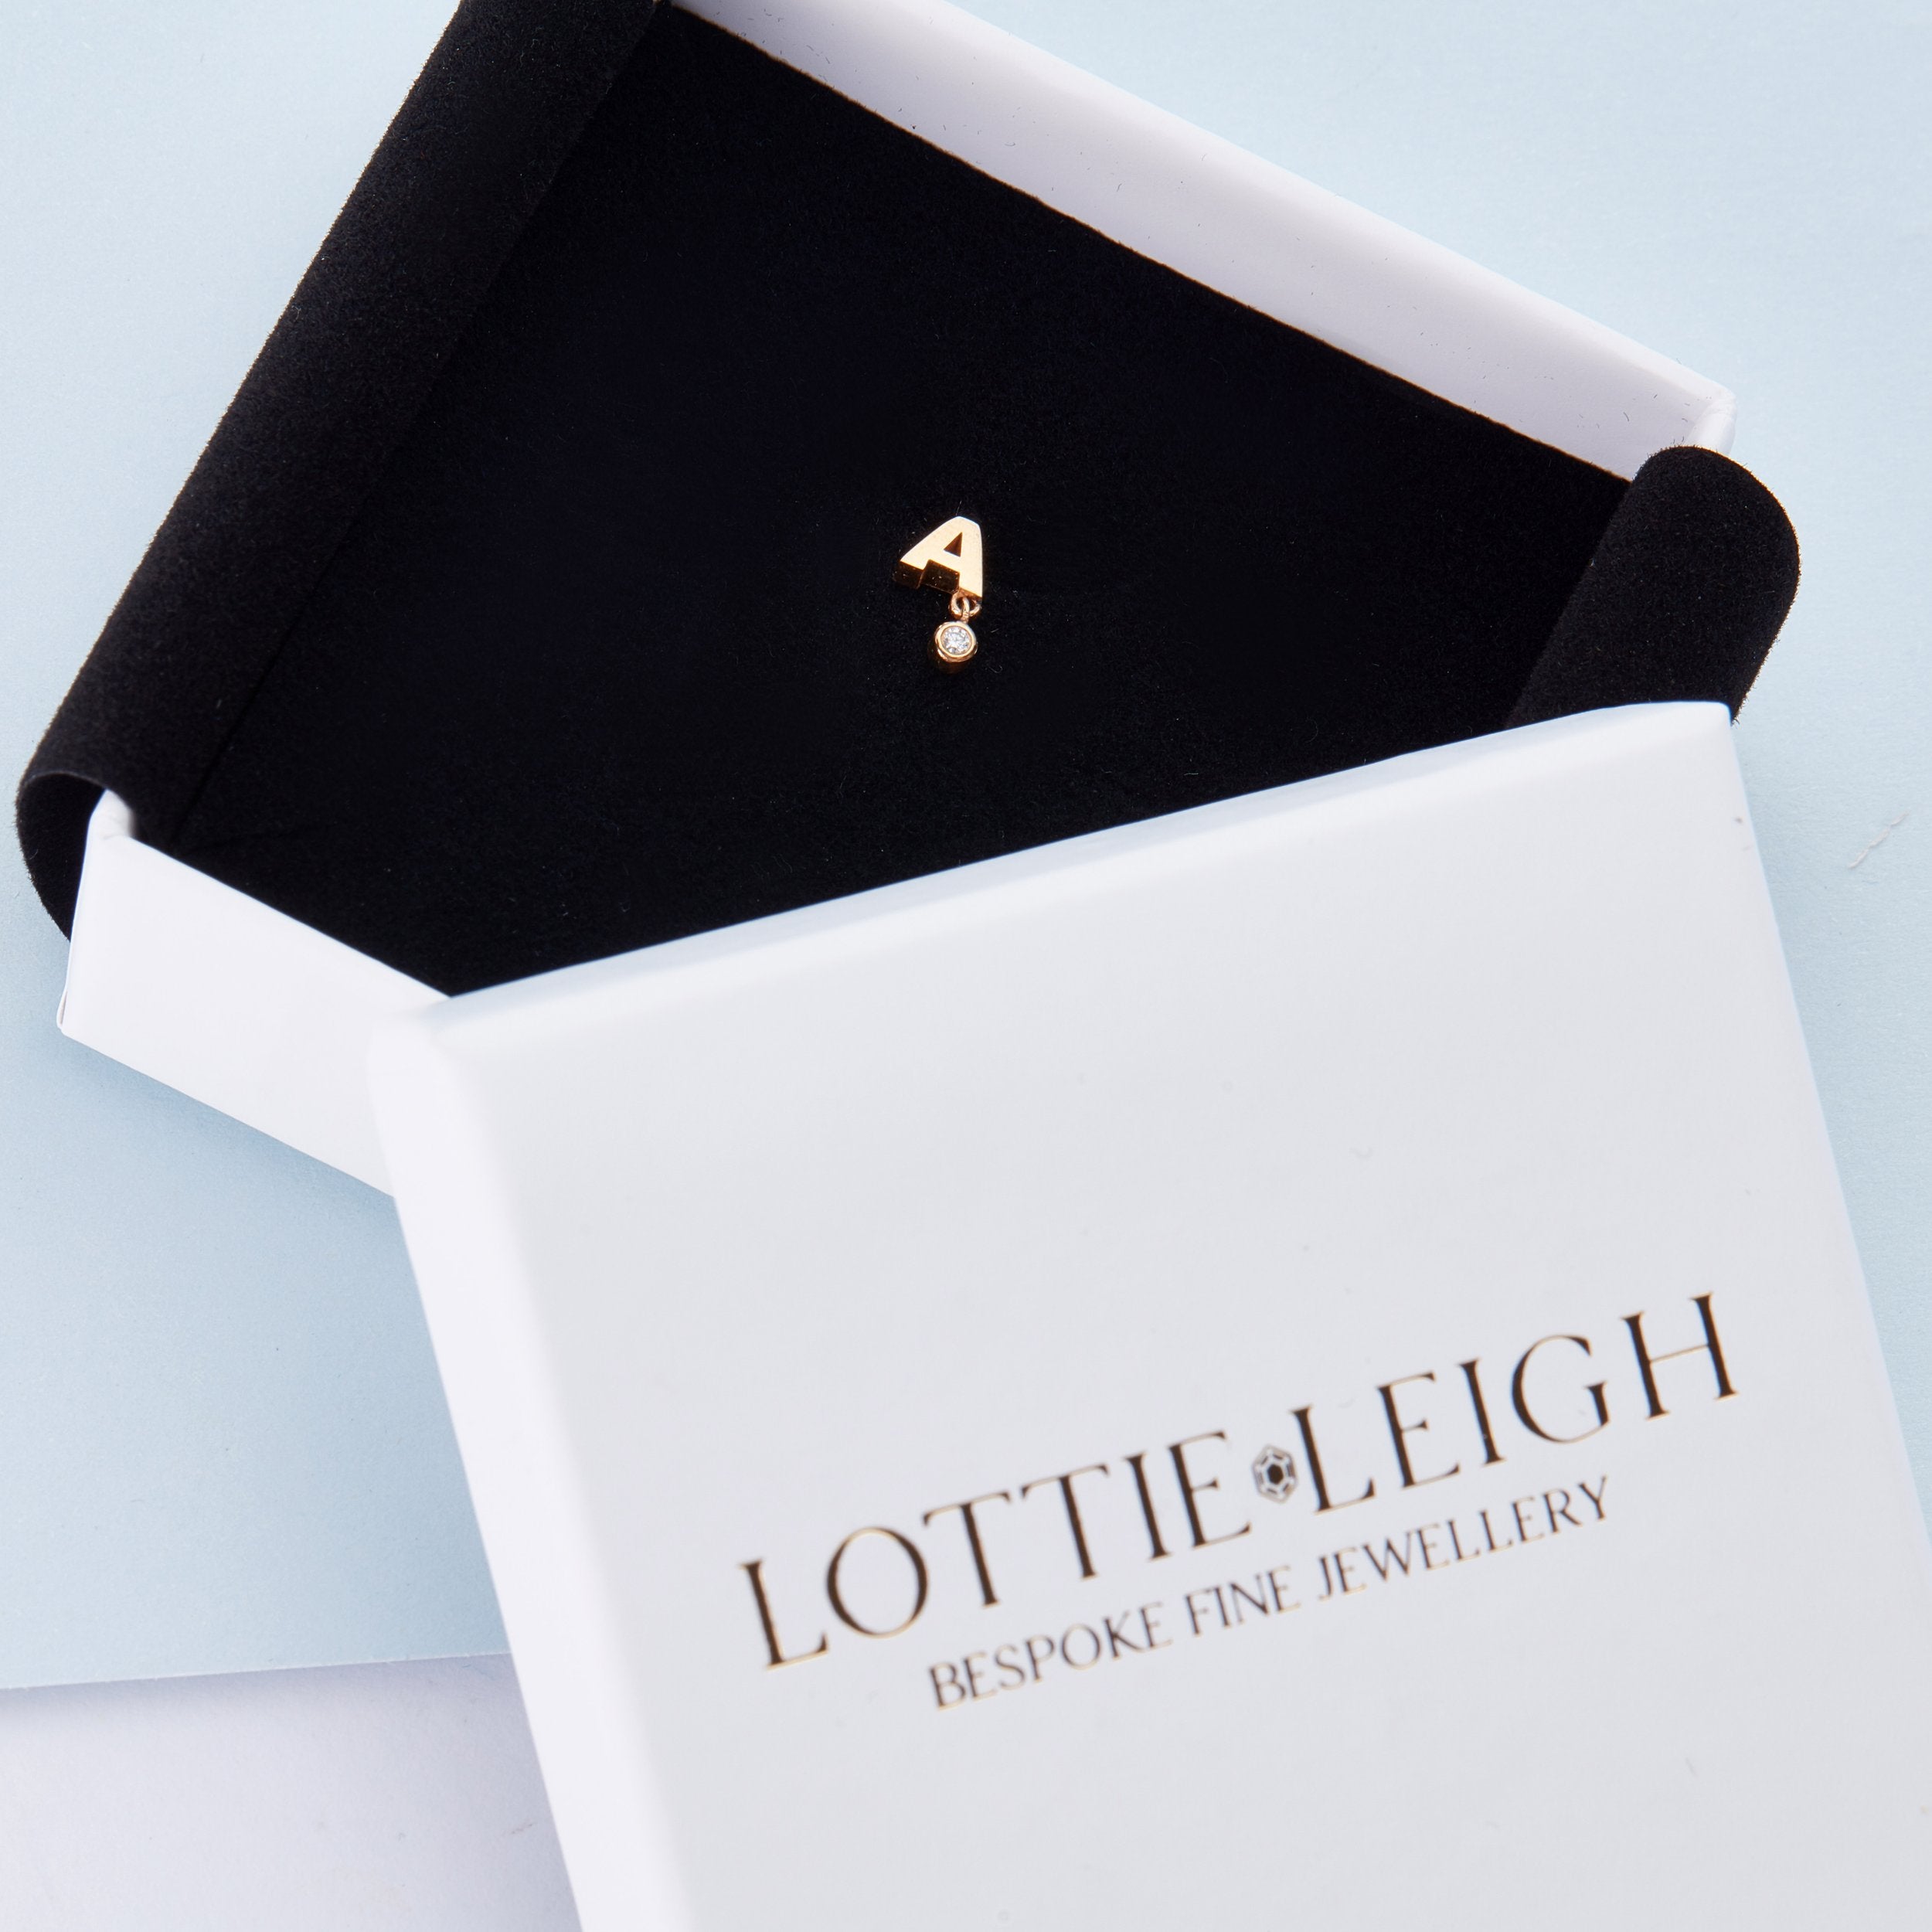 Lottie Leigh x Helix & Conch 9k solid gold initial butterfly back stud with Diamond drop - Helix & Conch